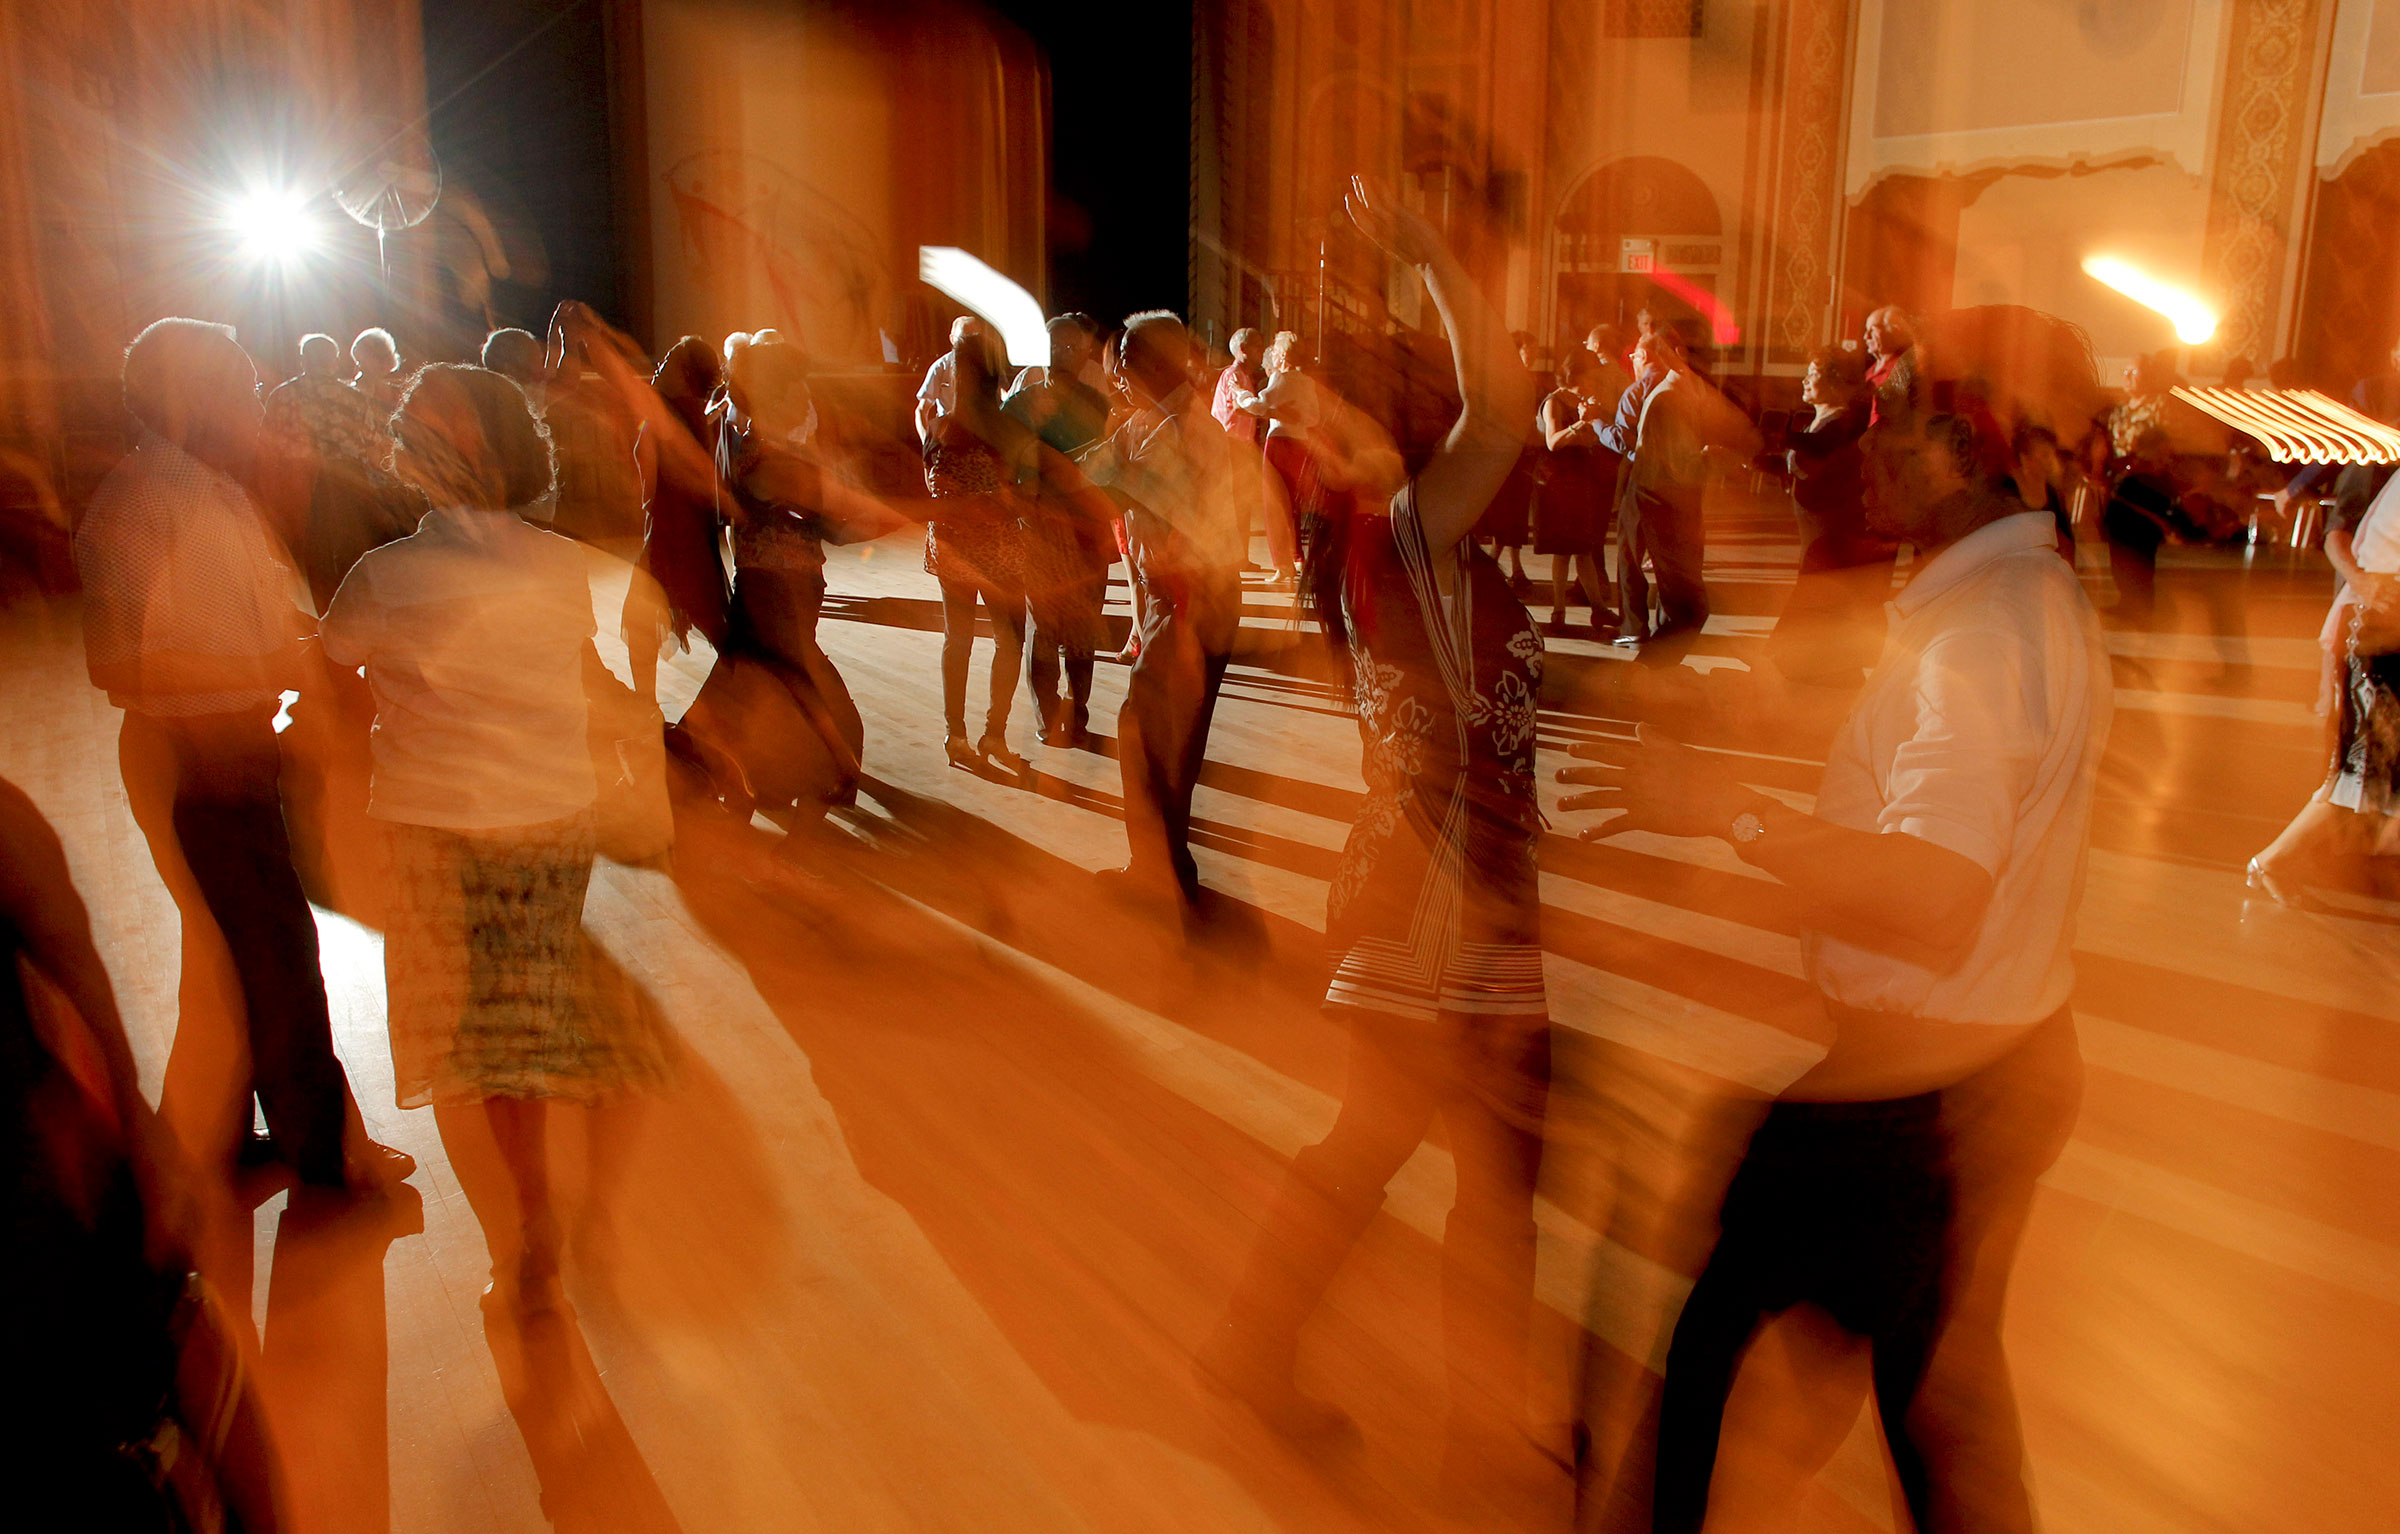 Dancers fill the floor at the Senior Center in Oakland, Calif., on July 19, 2012. For many senior citizens in AAPI communities, ballroom dancing is a popular pastime. (Michael Macor—San Francisco Chronicle/AP)